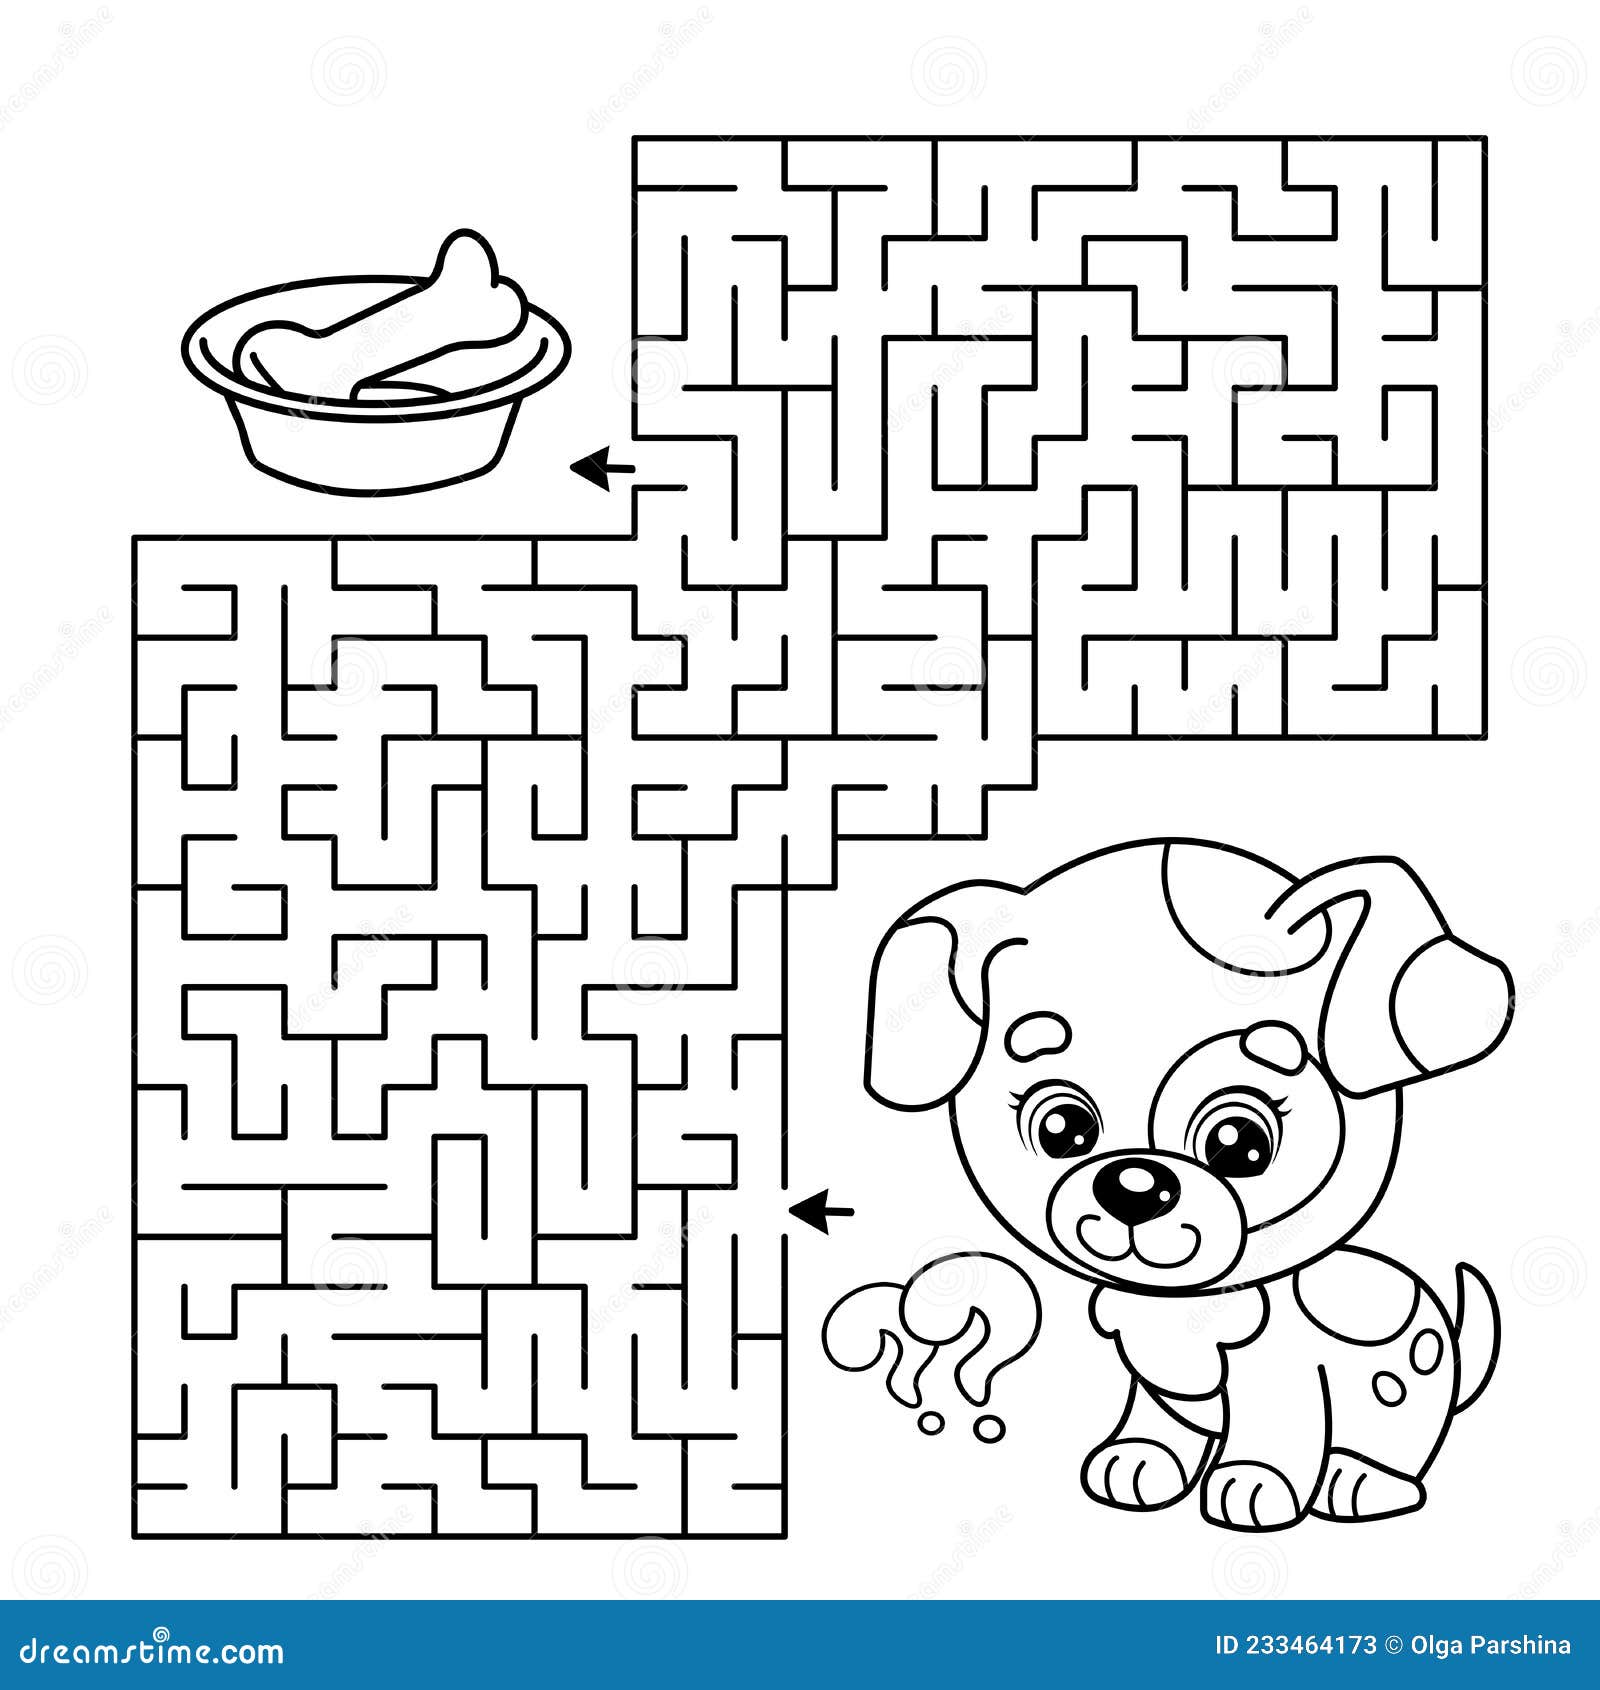 https://thumbs.dreamstime.com/z/maze-labyrinth-game-puzzle-coloring-page-outline-cartoon-little-dog-bone-puppy-book-kids-233464173.jpg